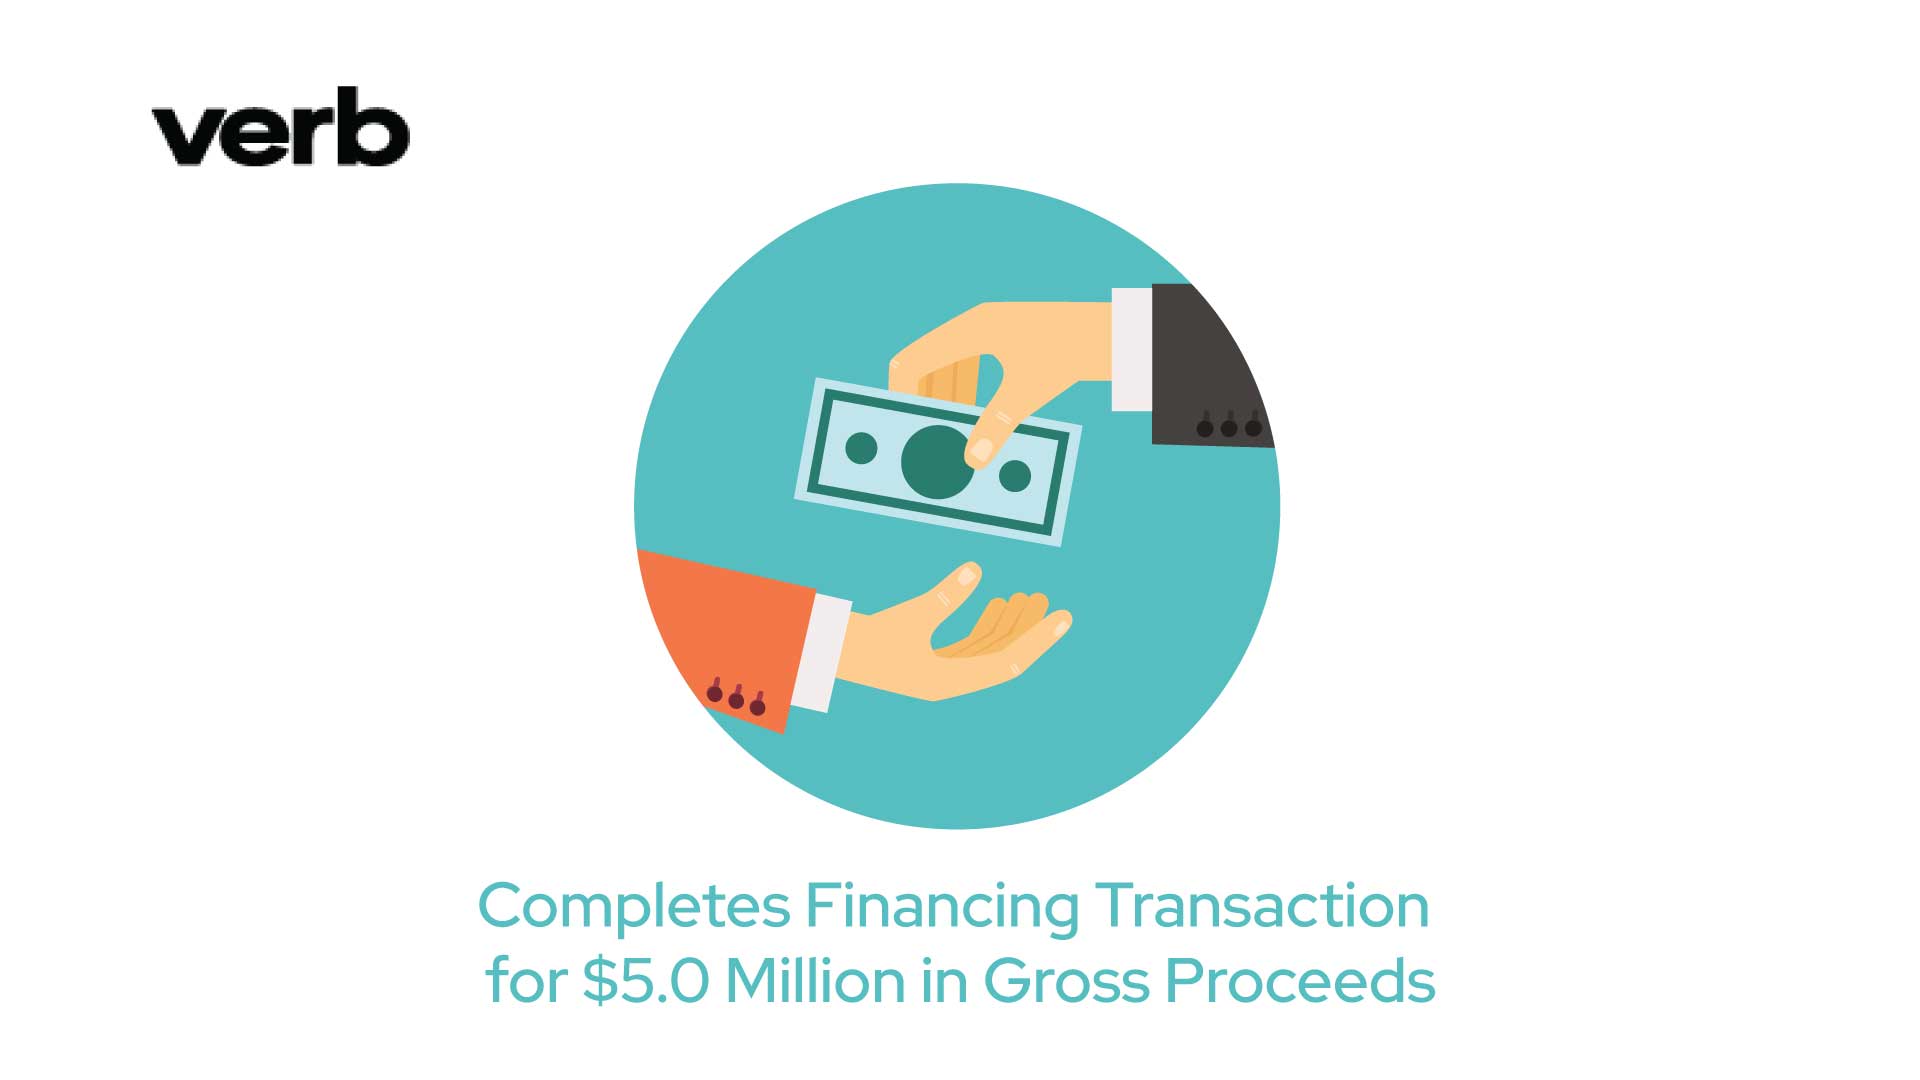 VERB Completes Financing Transaction for $5.0 Million in Gross Proceeds